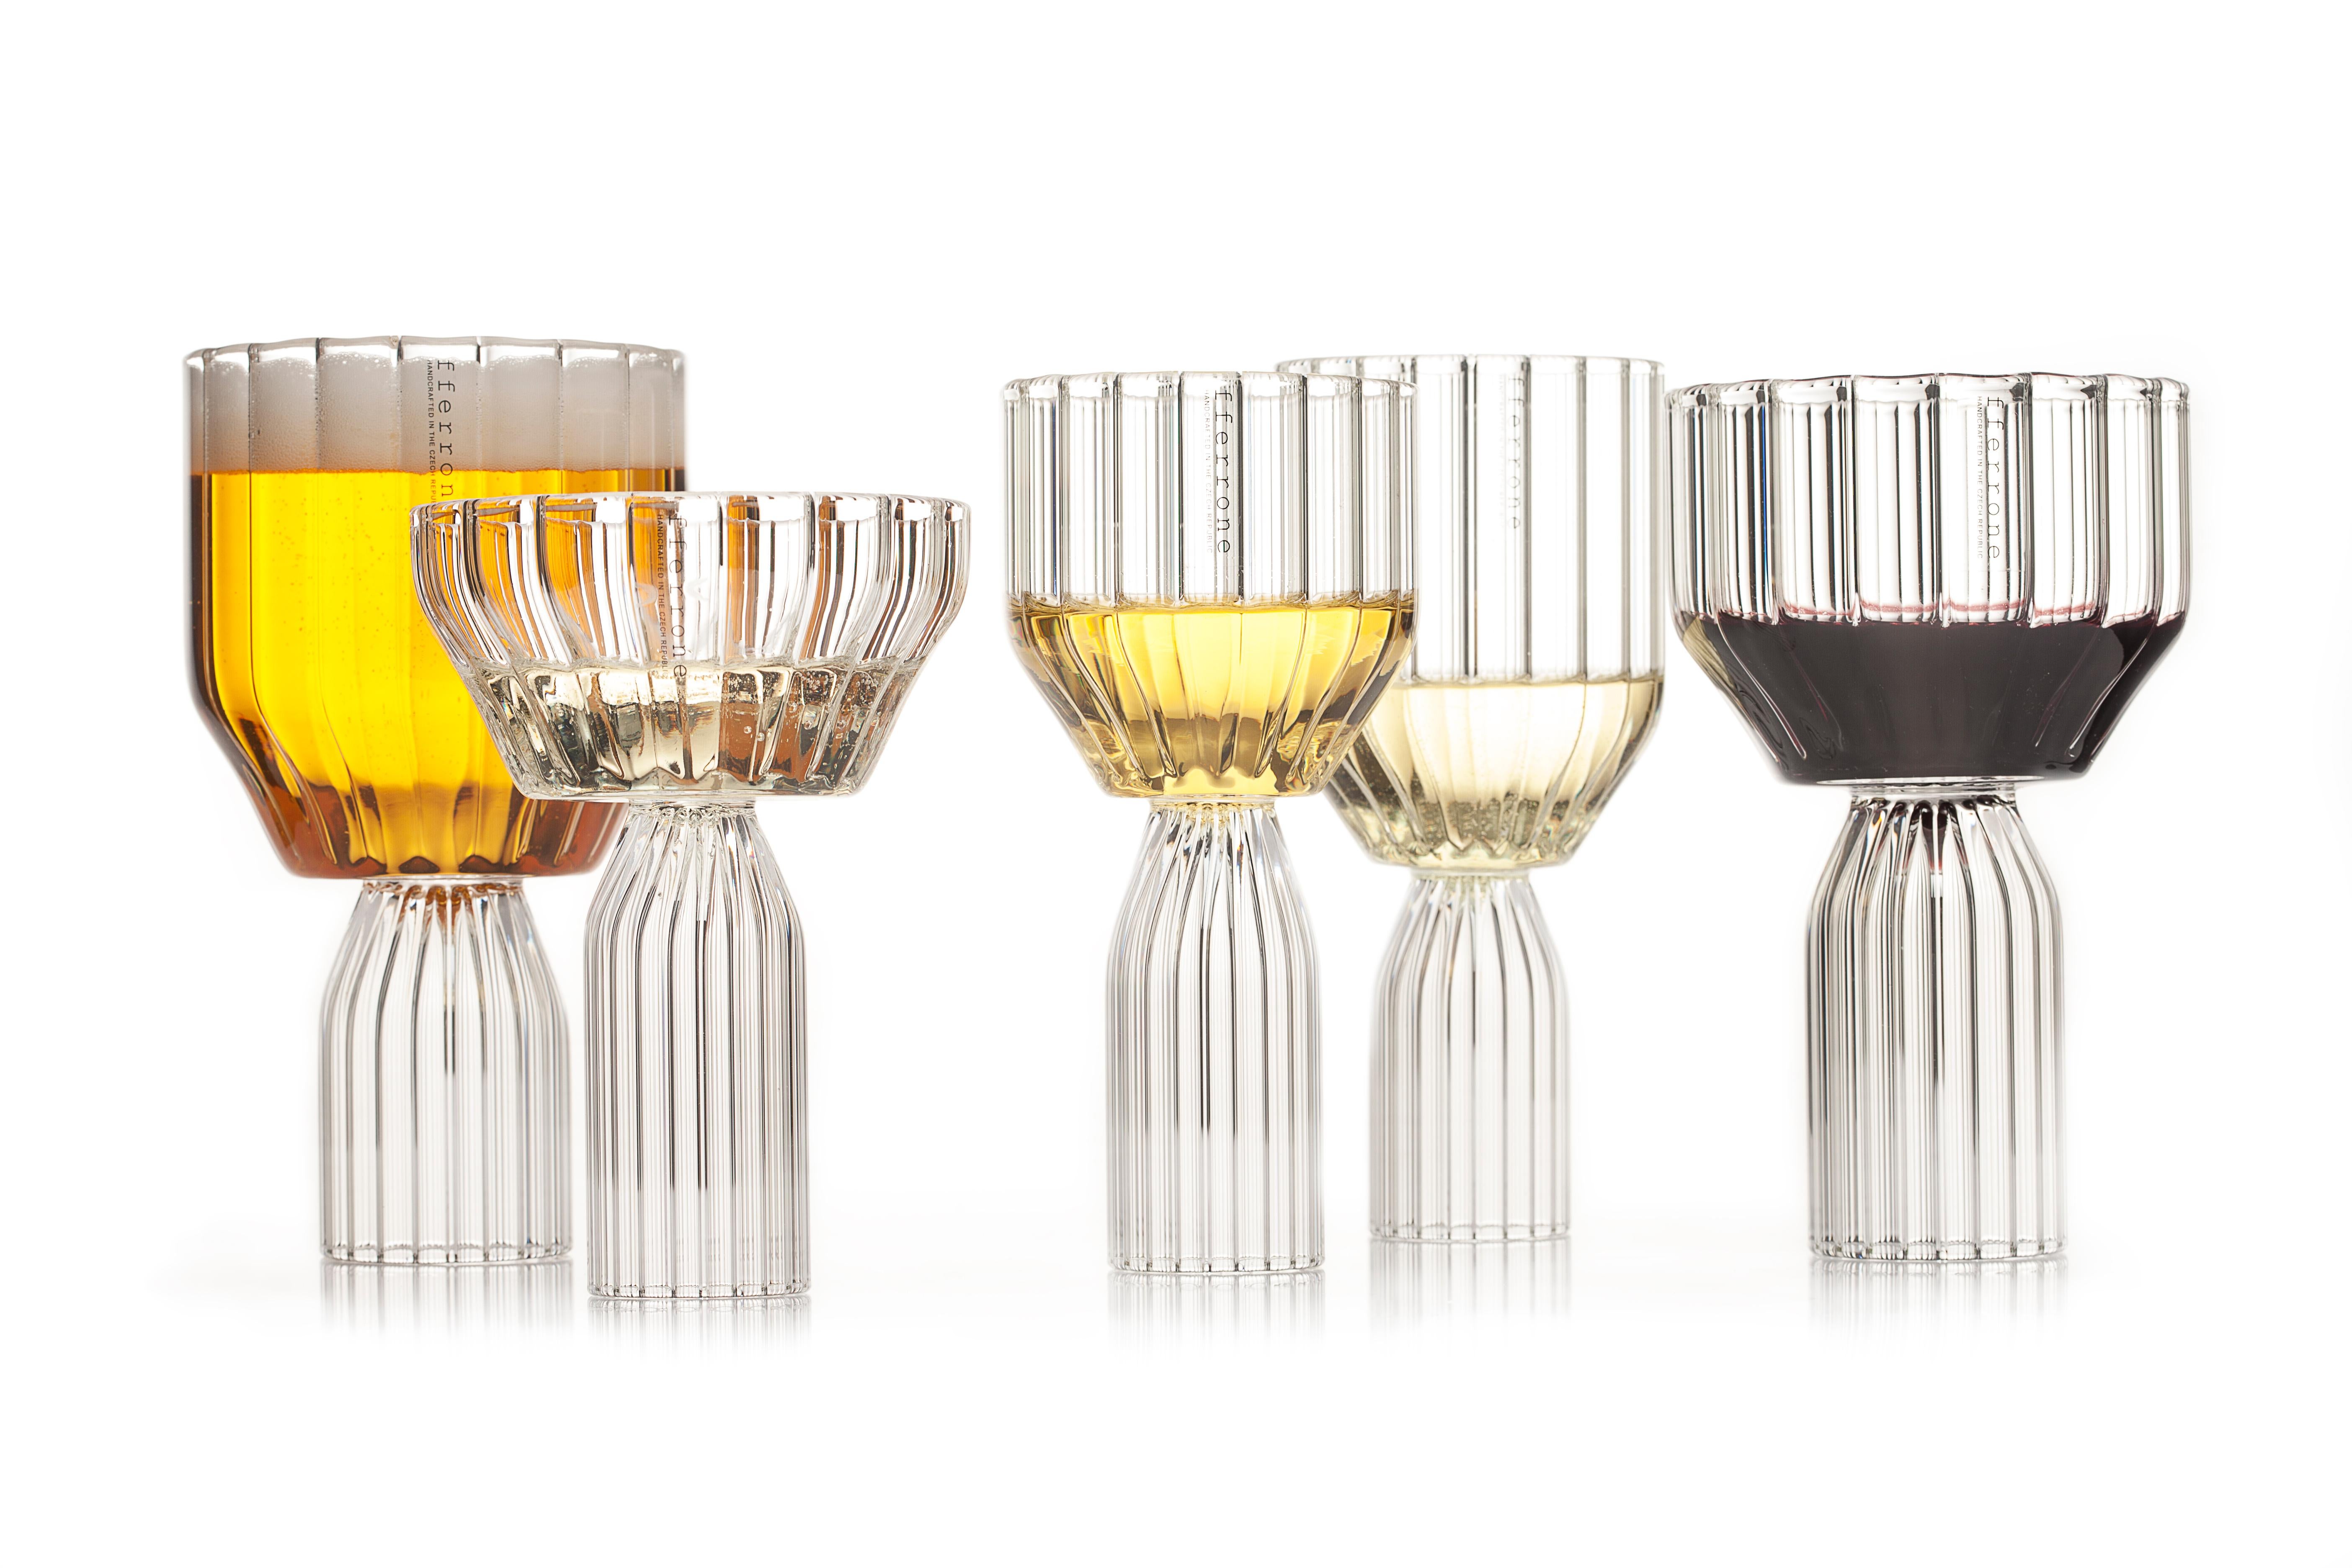 Czech EU Clients Pair of Contemporary Large Goblet Cocktail Glass Handcrafted in Stock